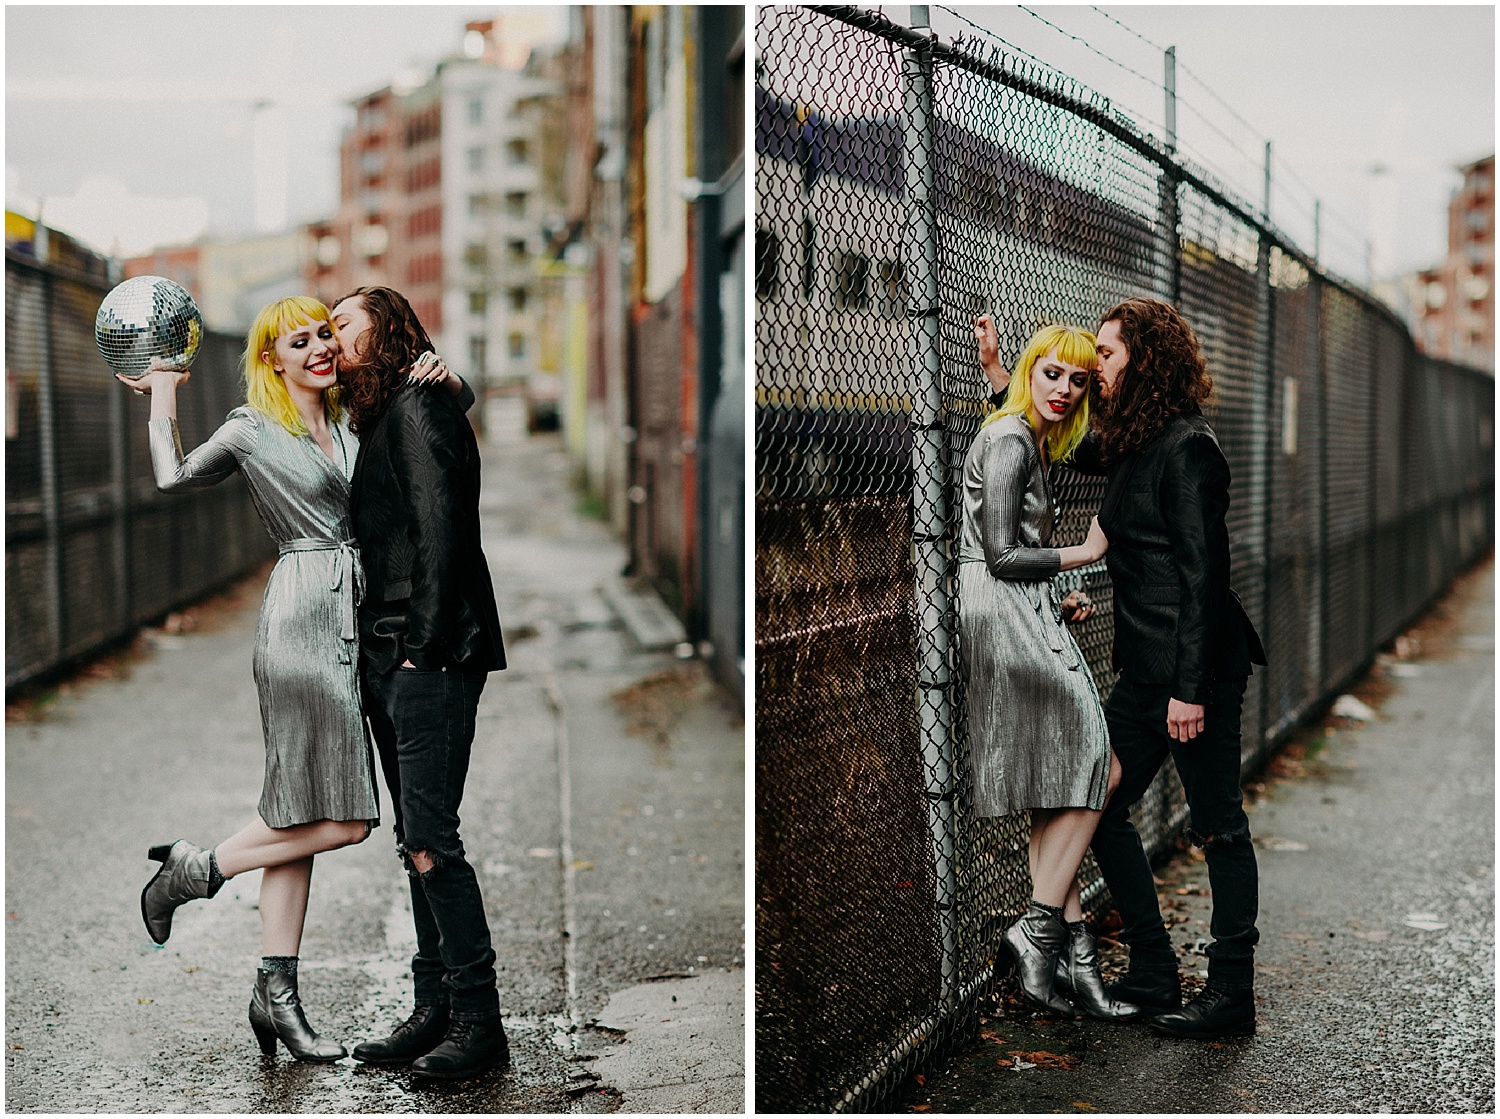  Vancouver back alley disco ball red lips yellow hair metallic dress shoes stylish men love engagement couples sessions chain link fence concrete jungle 